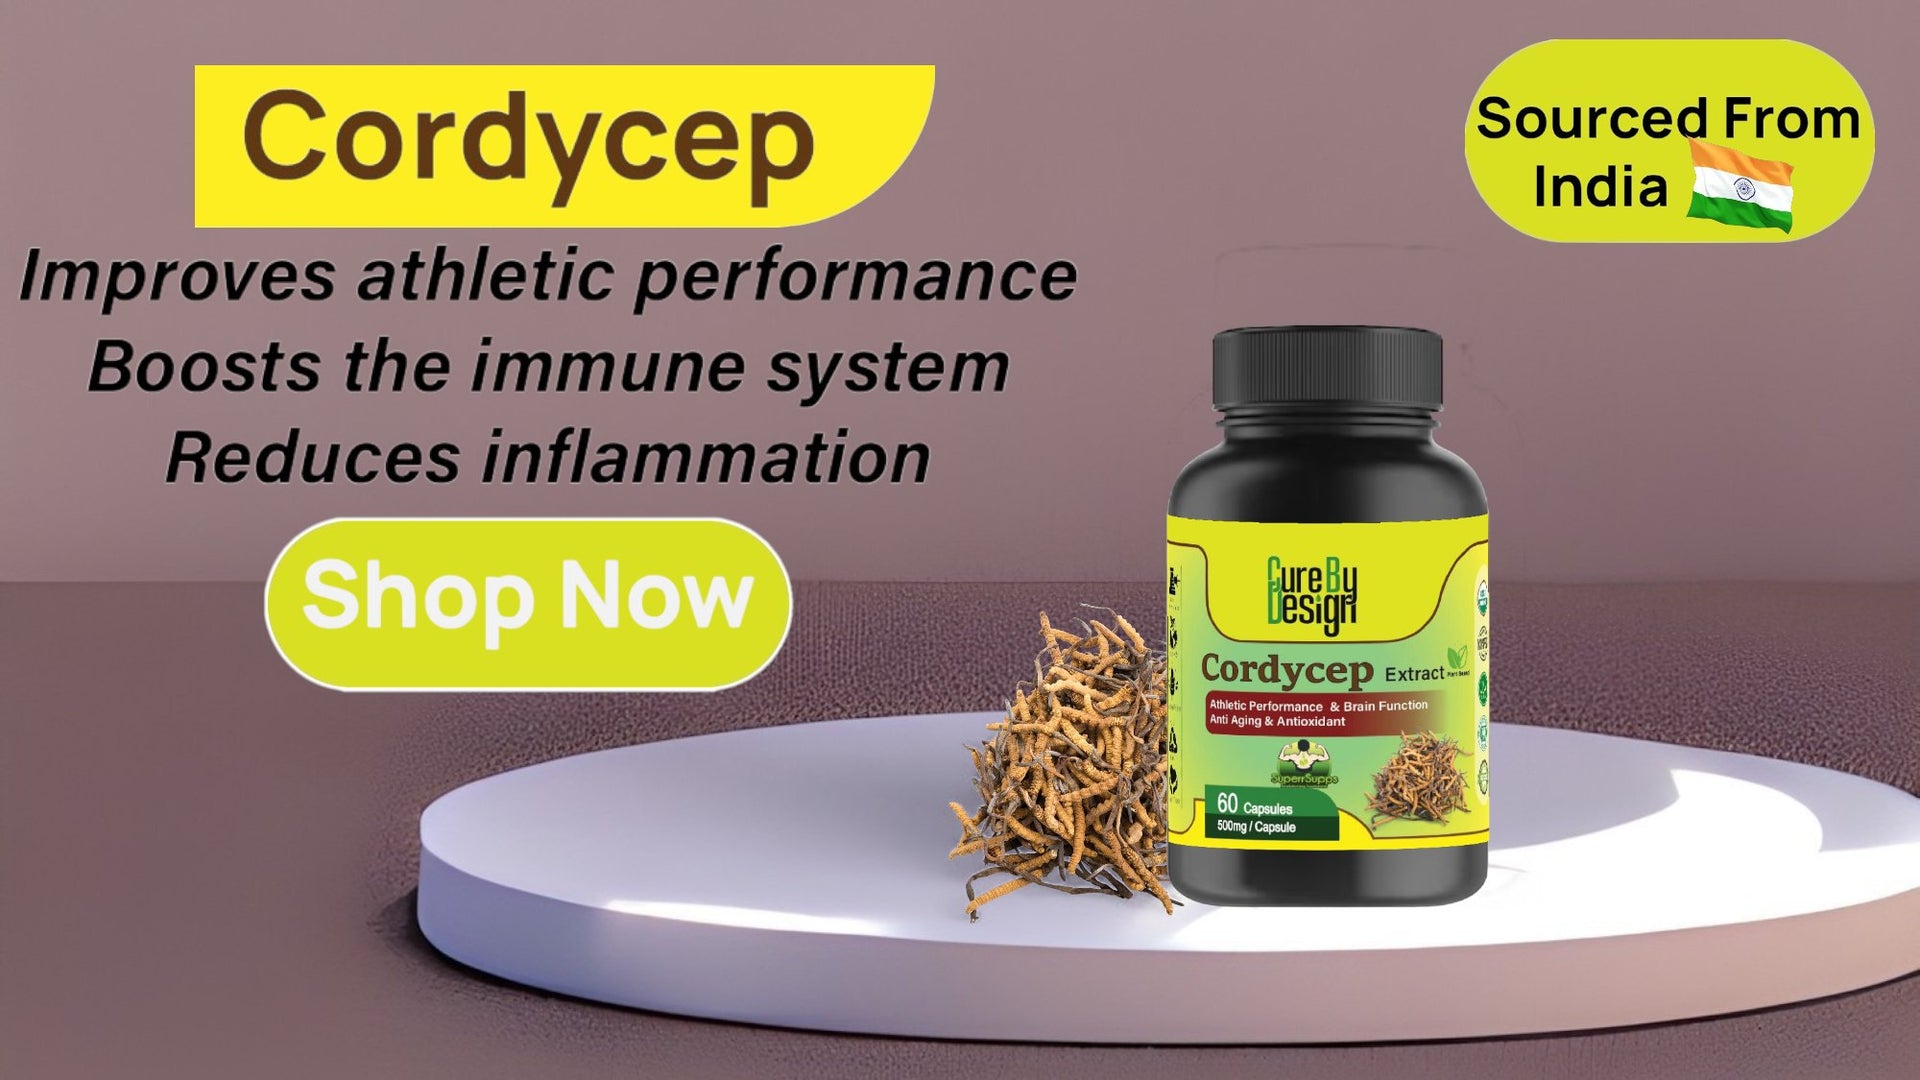 Cure By Design - Superrsupps Cordyceps Capsules - CBD Store India